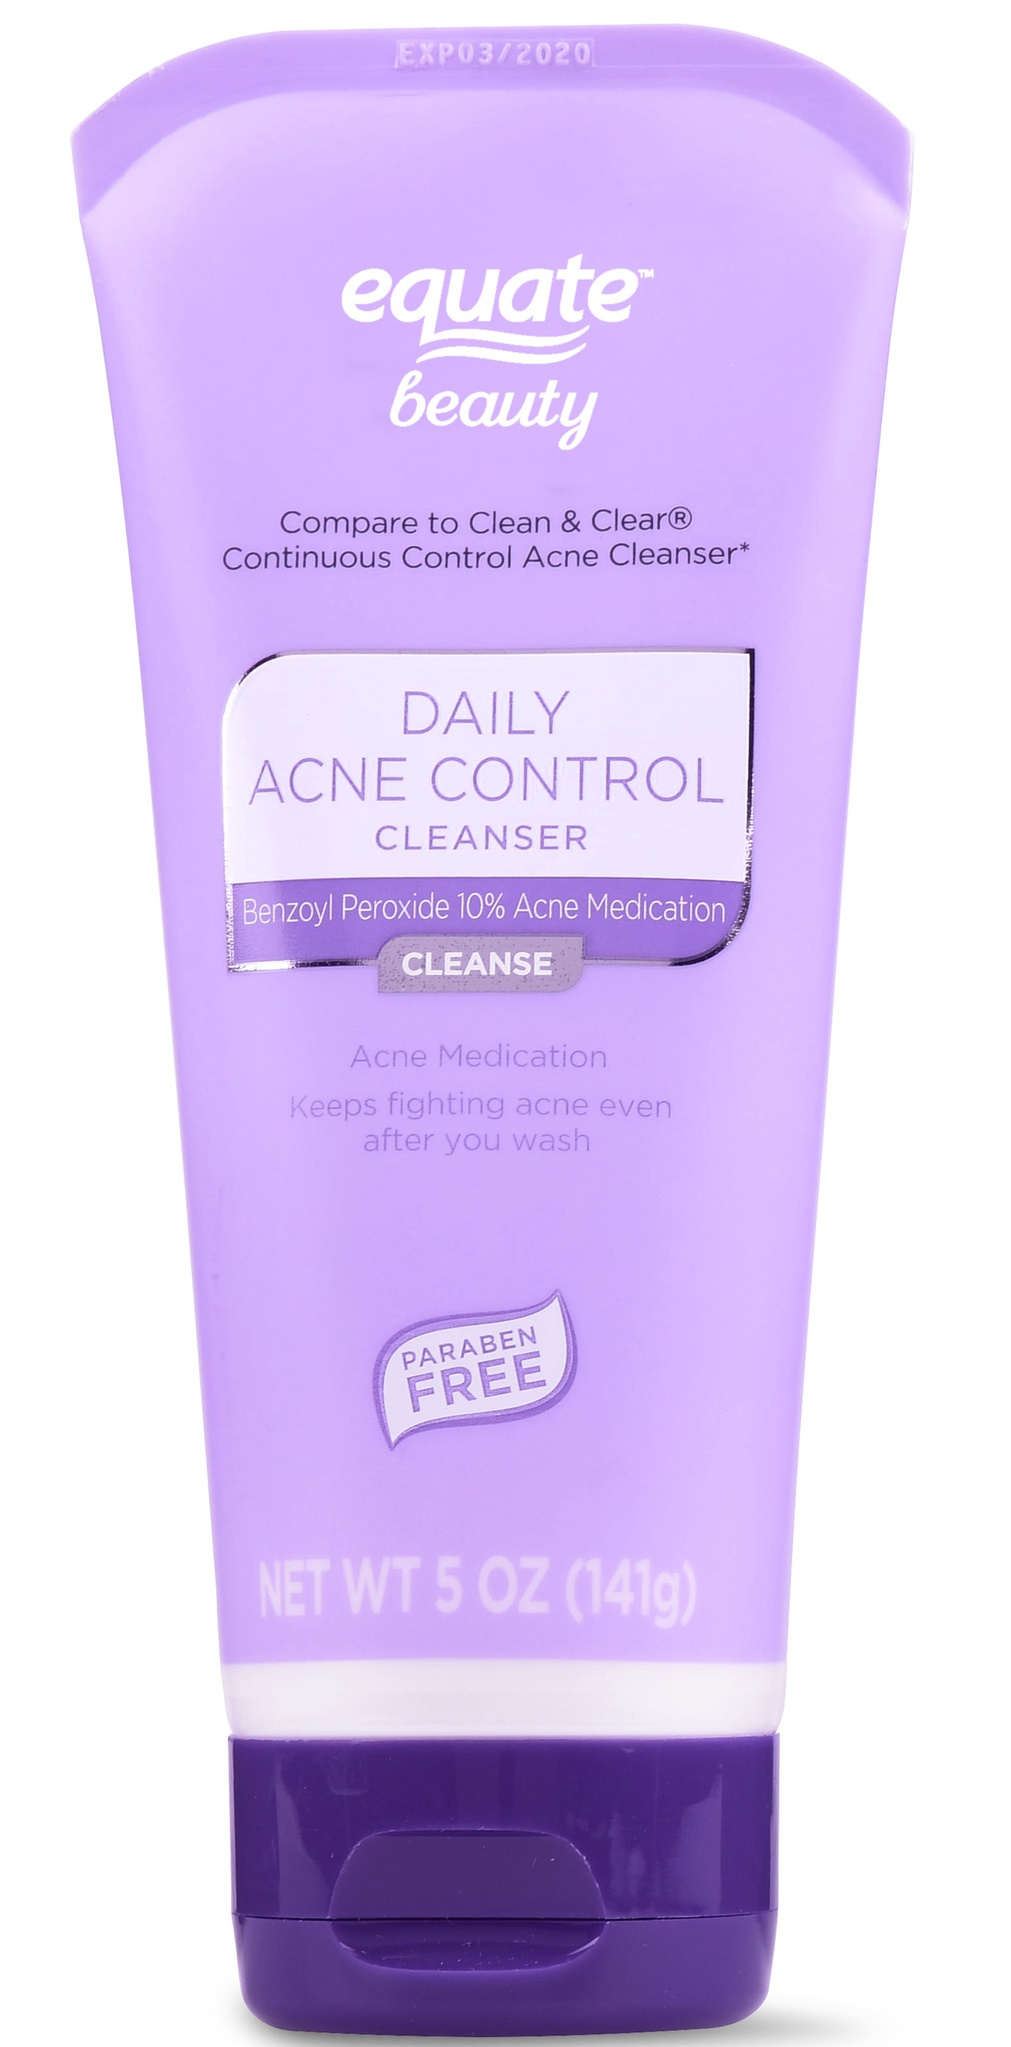 Equate Beauty Daily Acne Control Cleanser